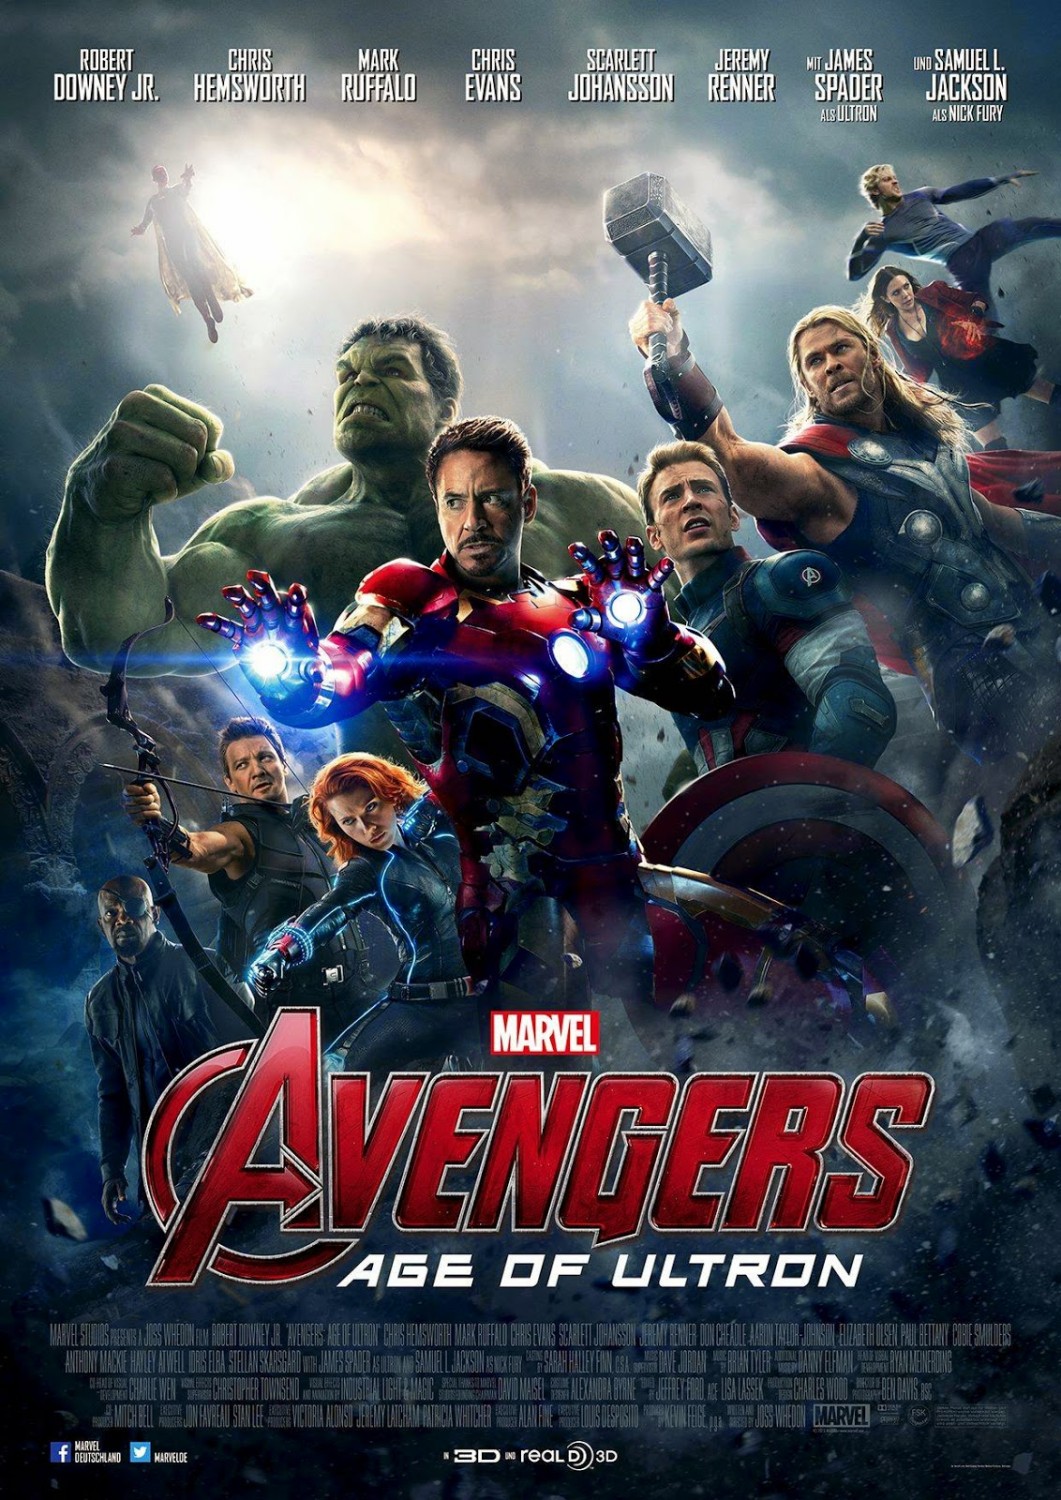 Avengers Age Of Ultron – Trailer 3